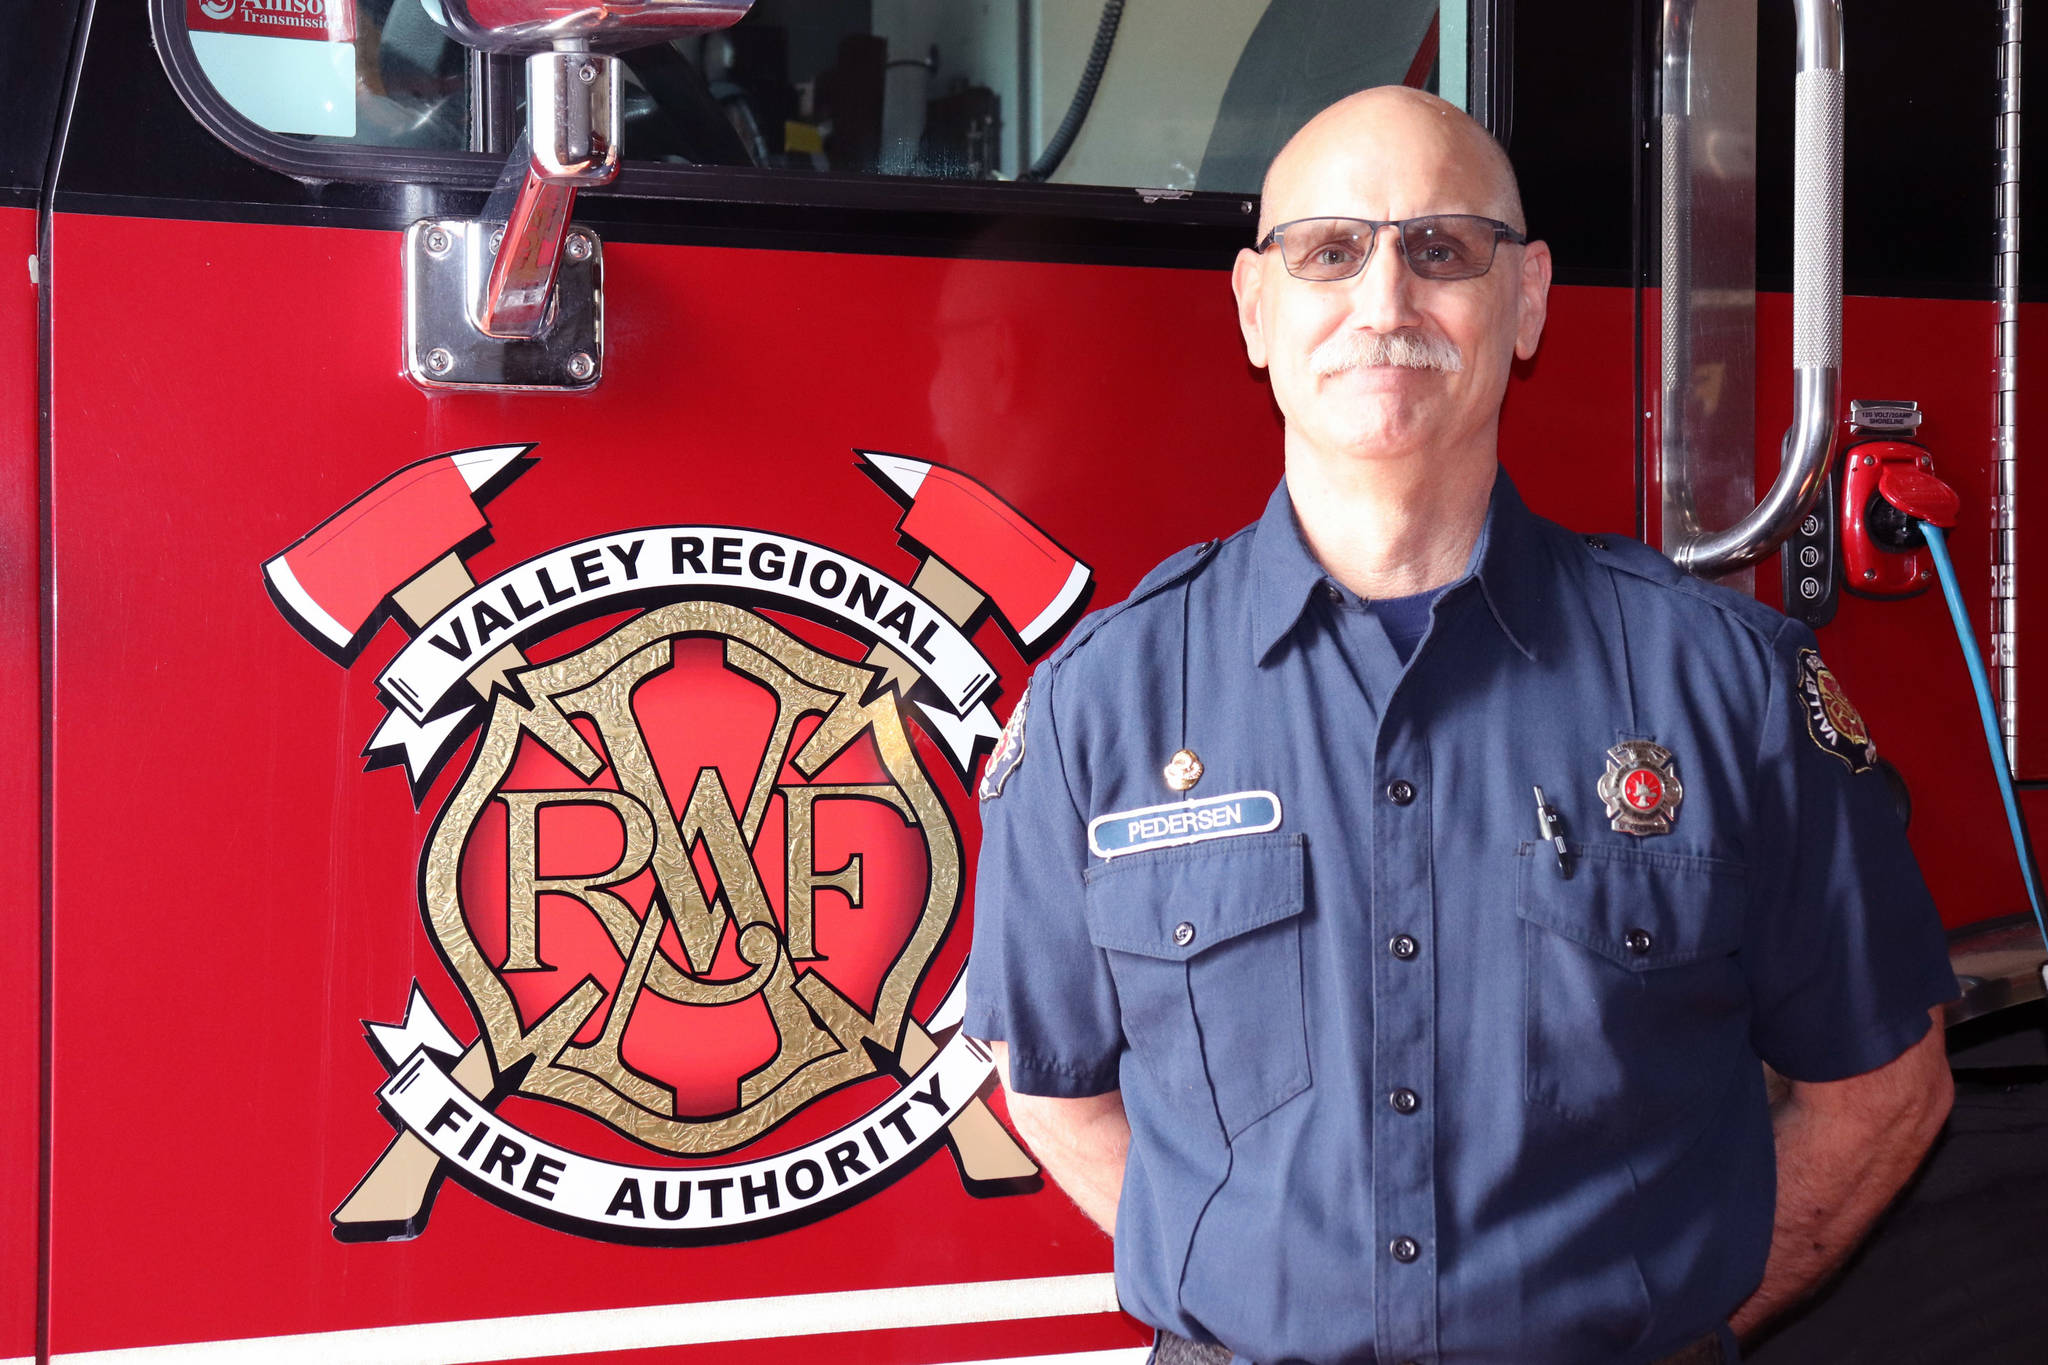 Courtesy photo
VRFA firefighter Neil Pedersen recently announced his retirement after 36 years with the service.